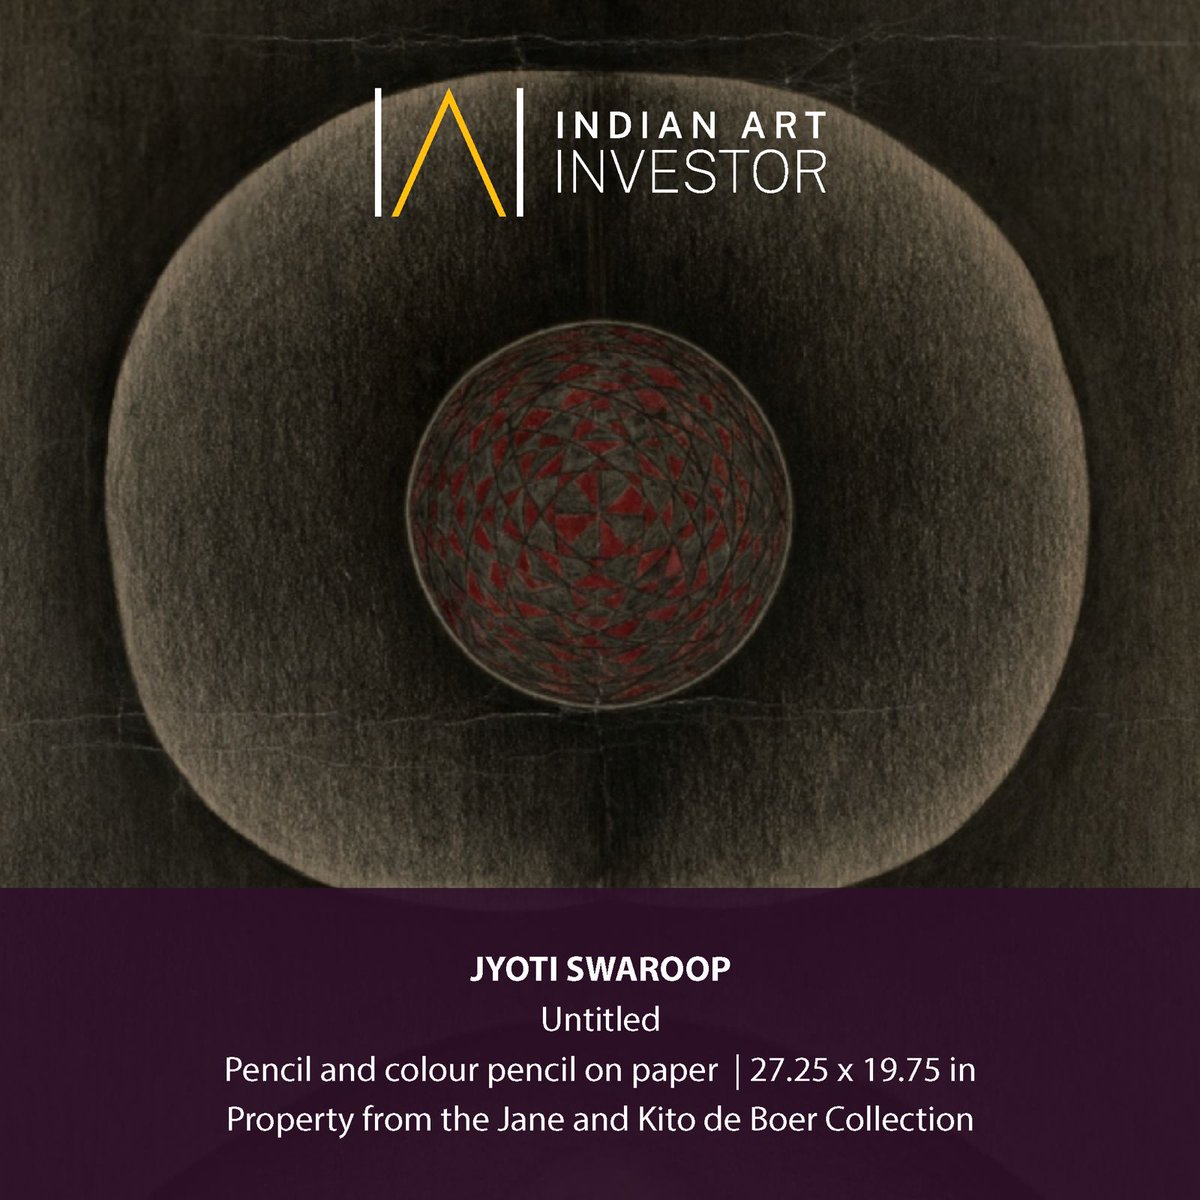 The top 5 most expensive works sold in Q3FY24 stood at a stunning value of ₹108.8 crores ($13.2 M).
.
#indianartmarket #investment #artadvisory #artworld #artinvestor #investmentplanning #investmentopportunity #affordableart #affordableinvestment